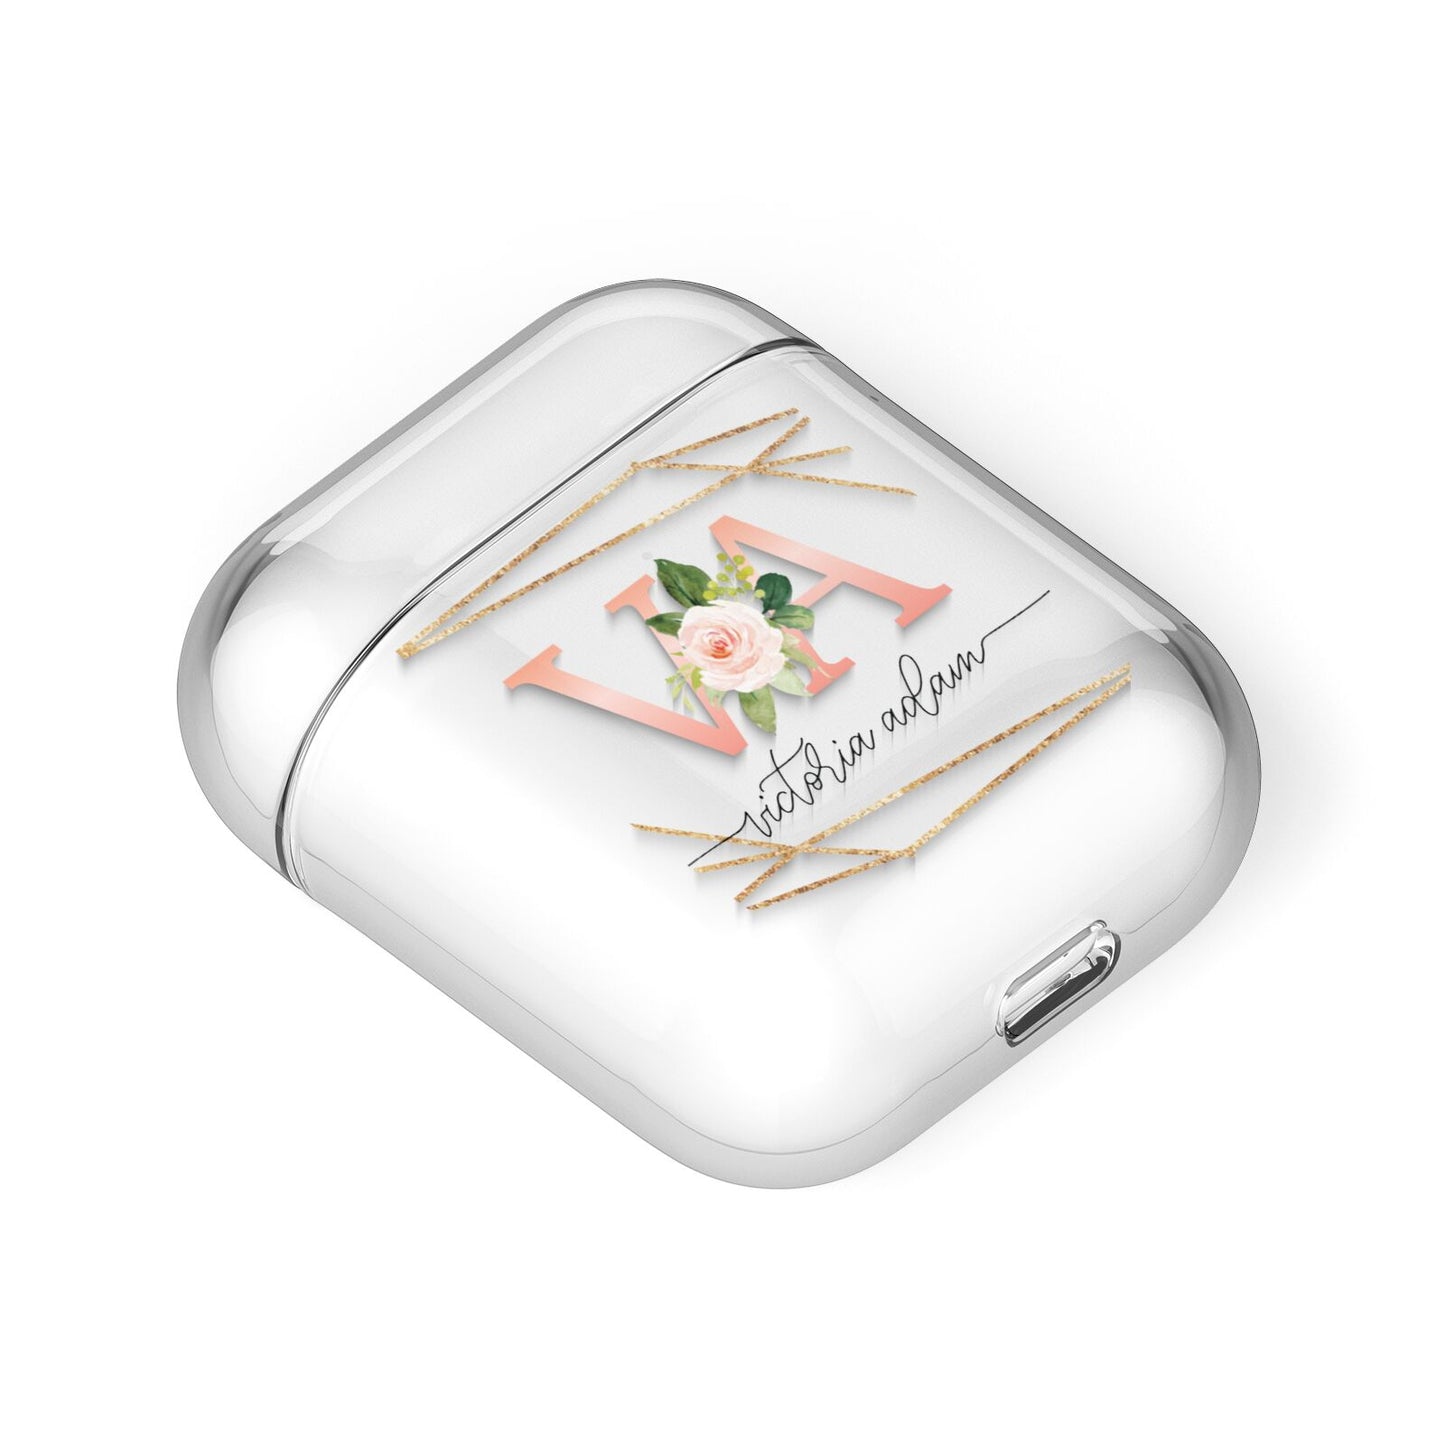 Blush Pink Rose Floral Personalised AirPods Case Laid Flat